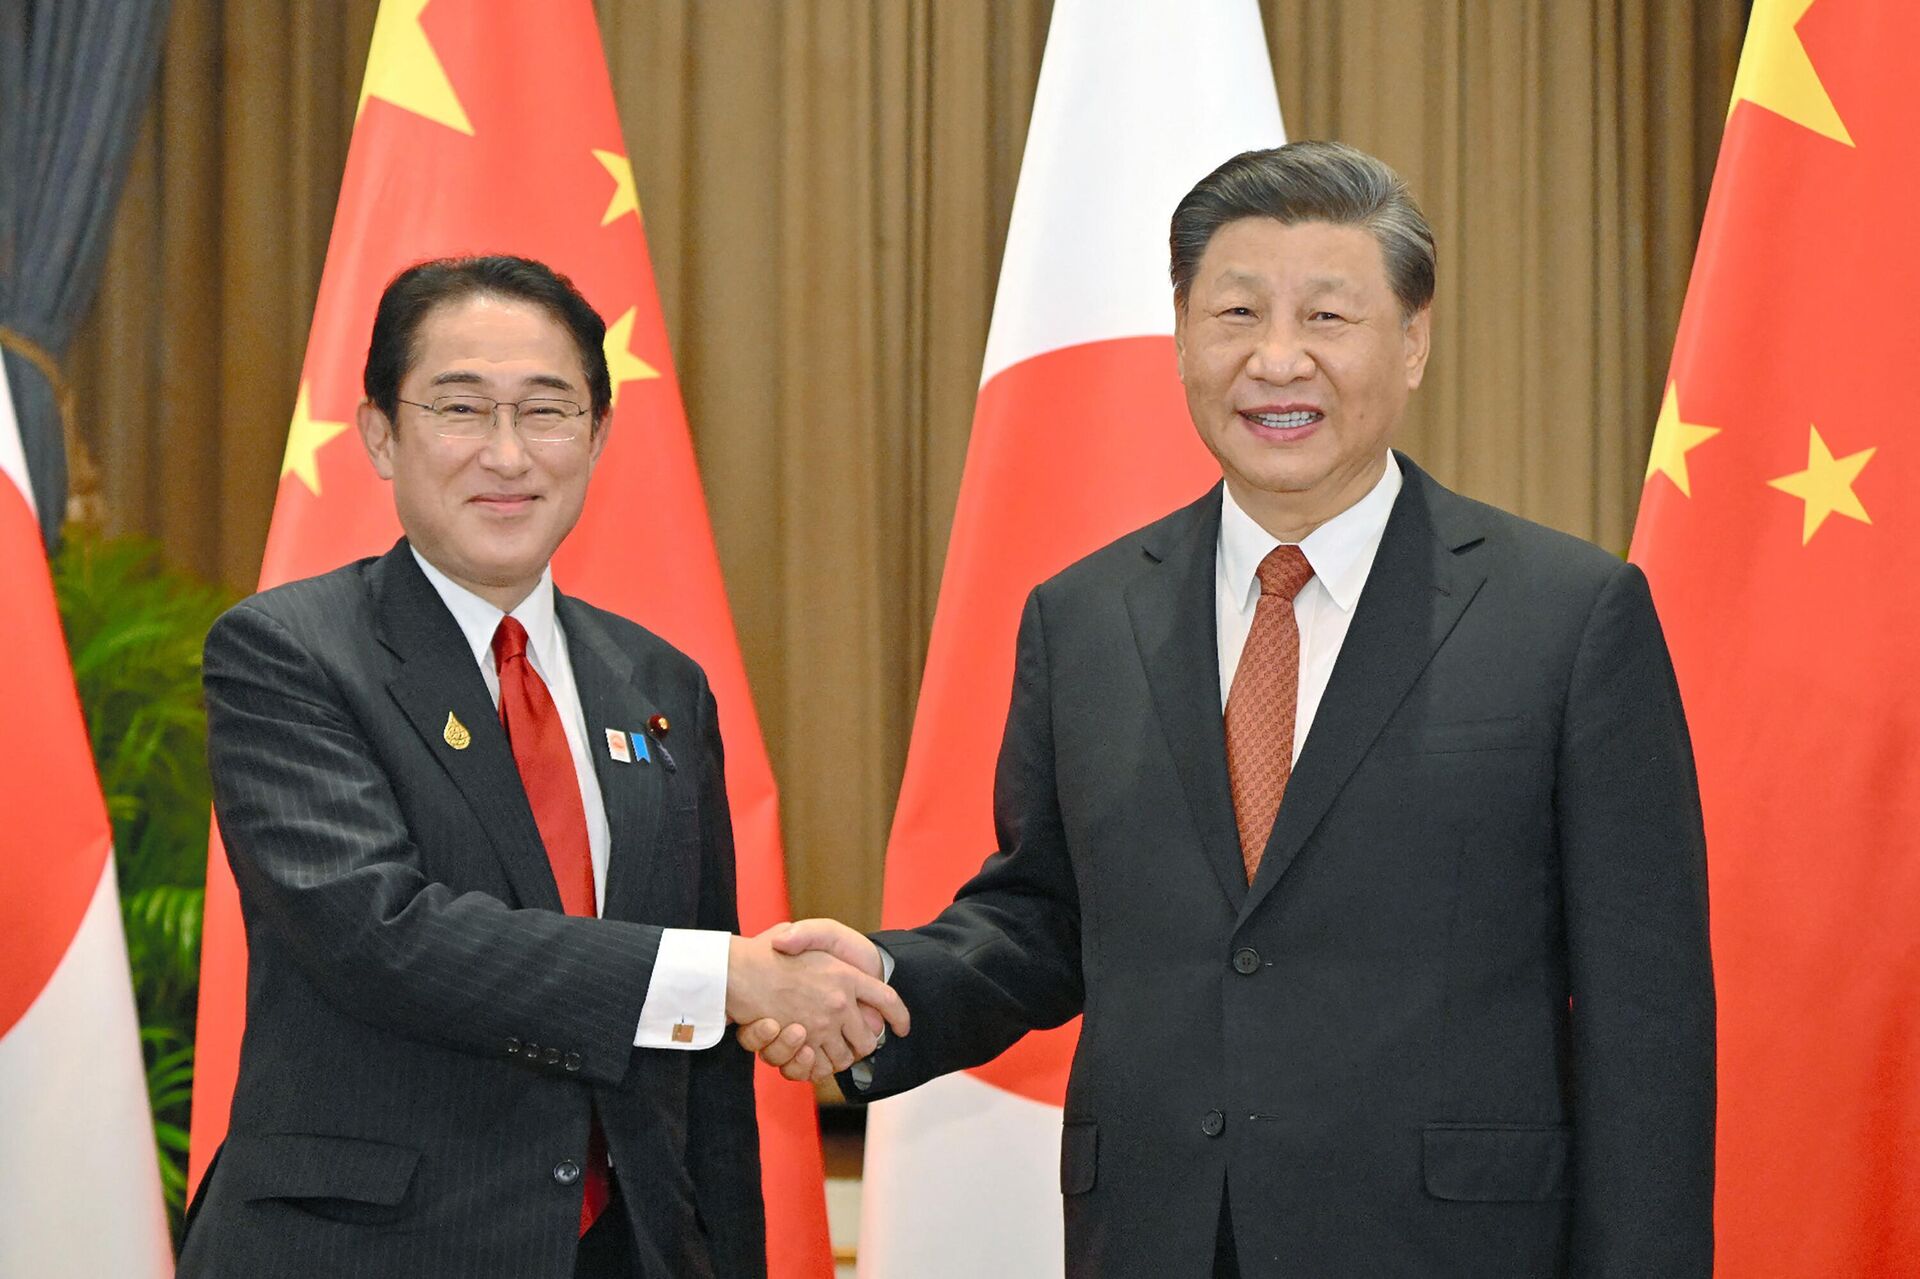 Japan's Prime Minister Fumio Kishida (L) shakes hands with China's President Xi Jinping during their meeting in Bangkok on November 17, 2022, on the sidelines of the Asia-Pacific Economic Cooperation (APEC) Summit. - Sputnik International, 1920, 07.12.2022